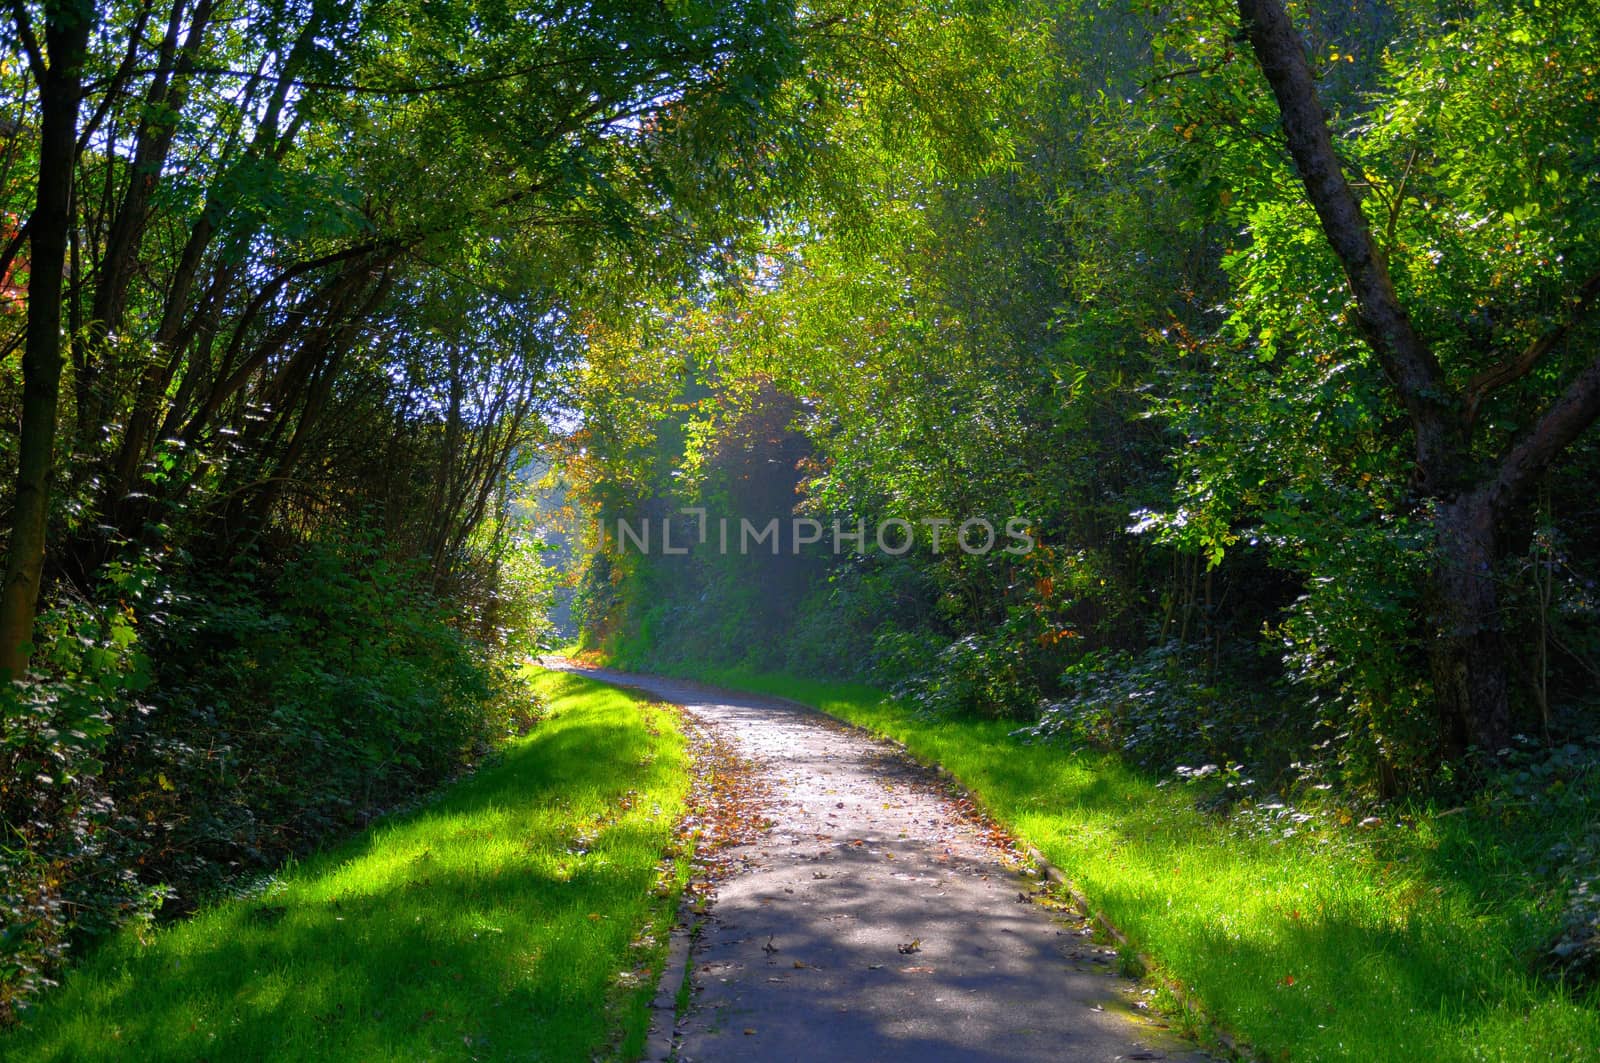 Misterious shady green alley with trees in the park in Fulda, Hessen, Germany